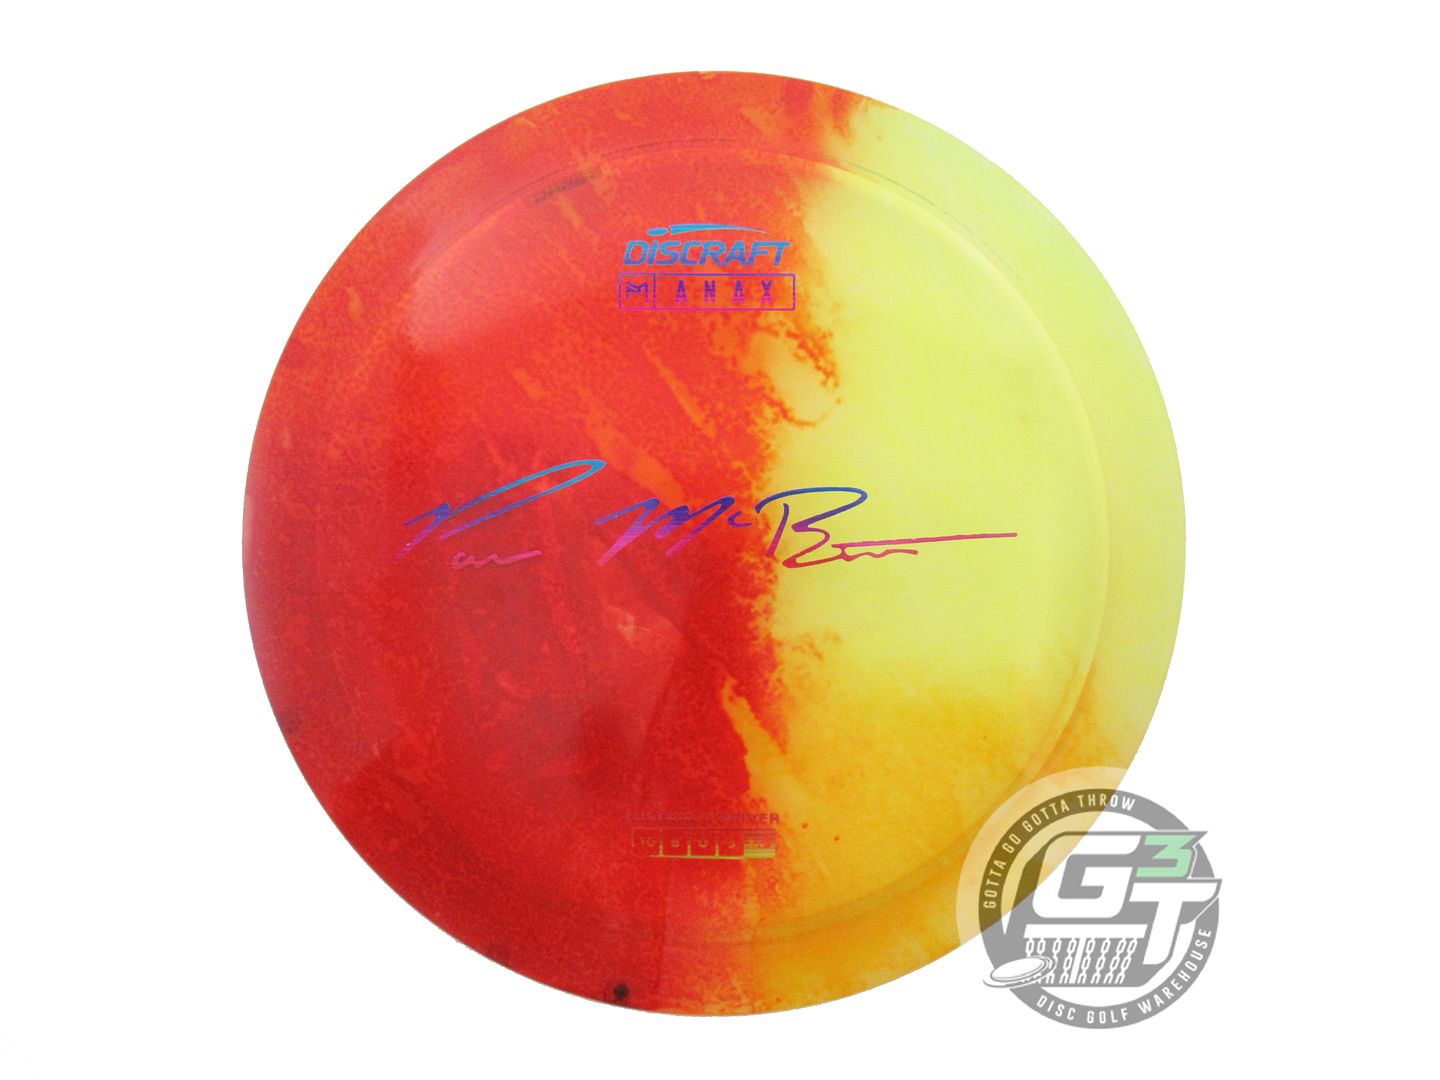 Discraft Paul McBeth Signature Fly Dye Elite Z Anax Distance Driver Golf Disc (Individually Listed)